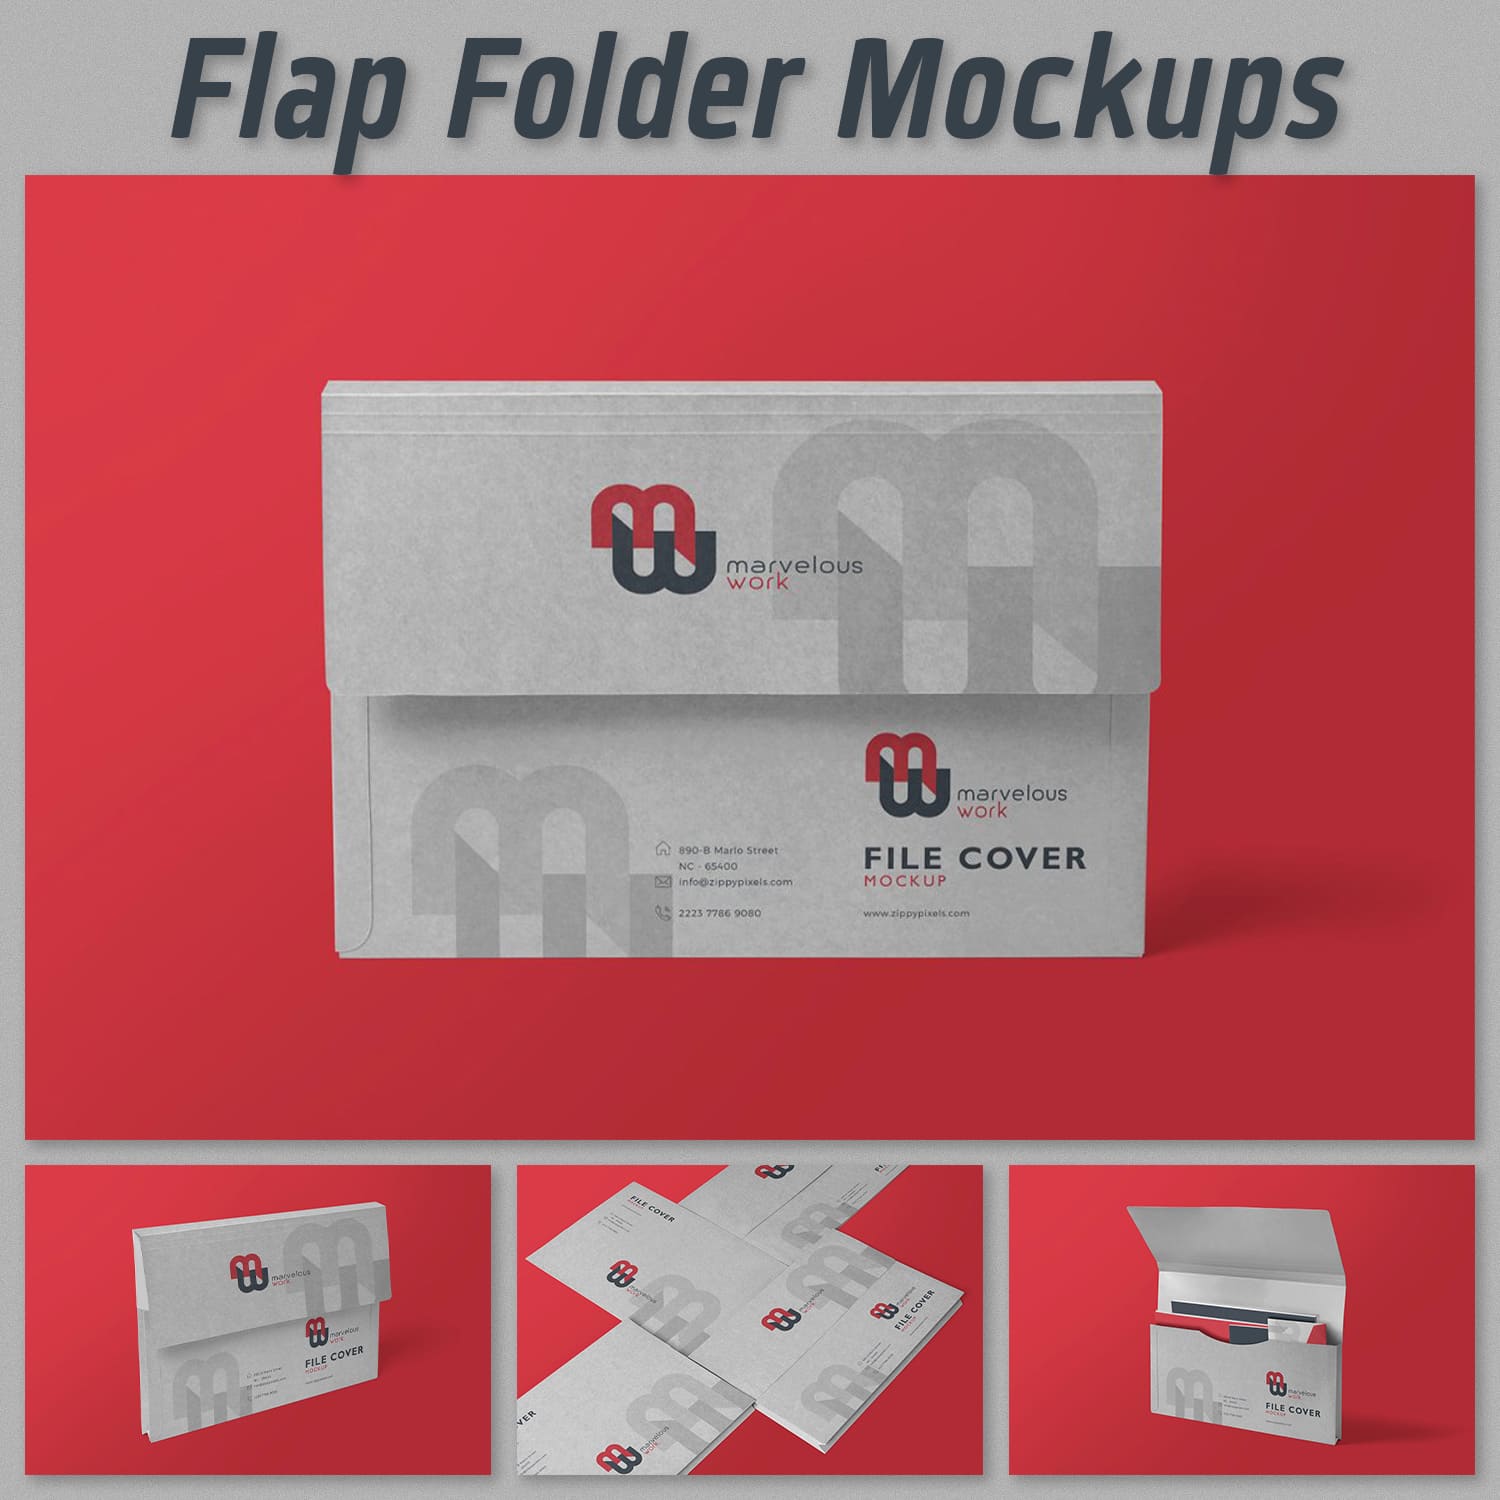 Pack of images of a flap folder with an enchanting design.